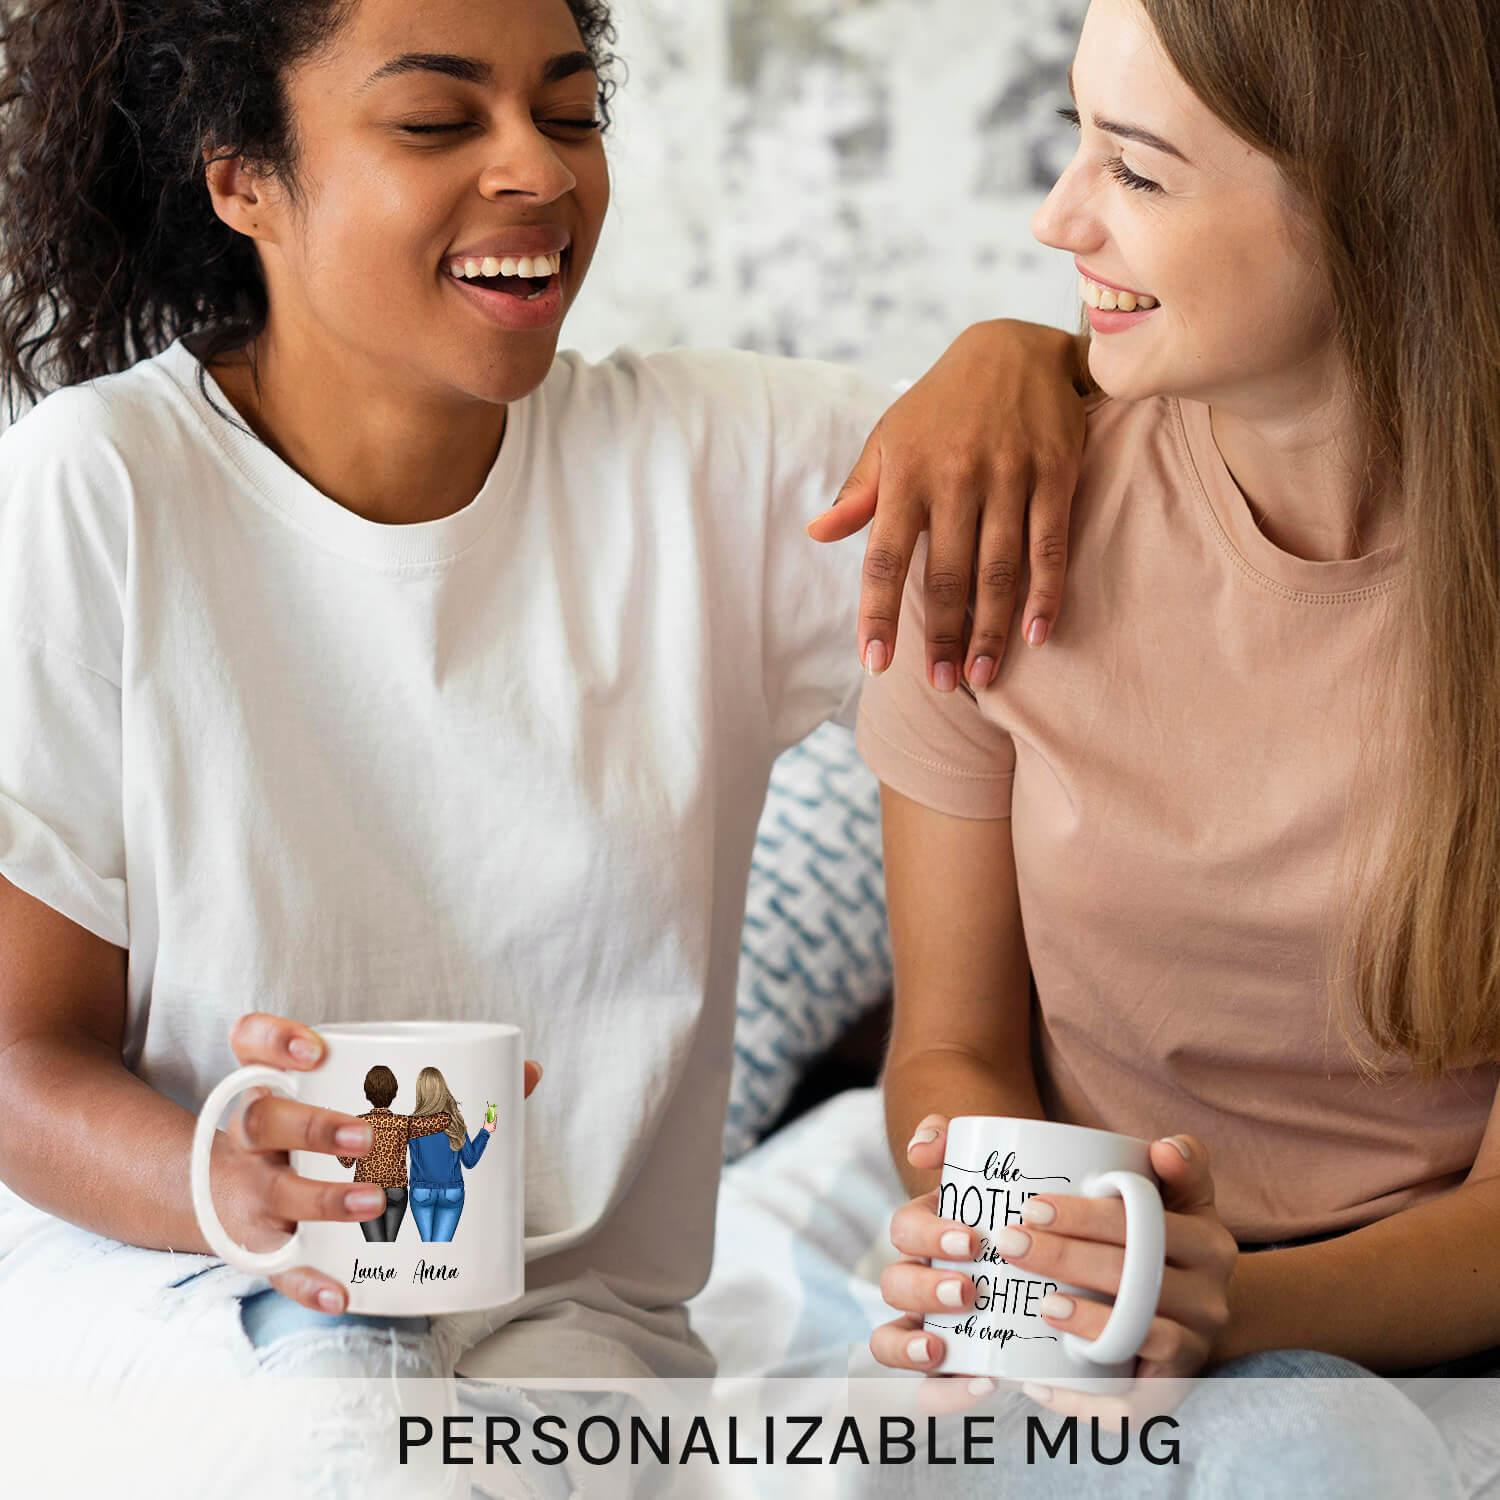 Like Mother Like Daughter - Personalized Mother's Day or Birthday gift for Mom - Custom Mug - MyMindfulGifts